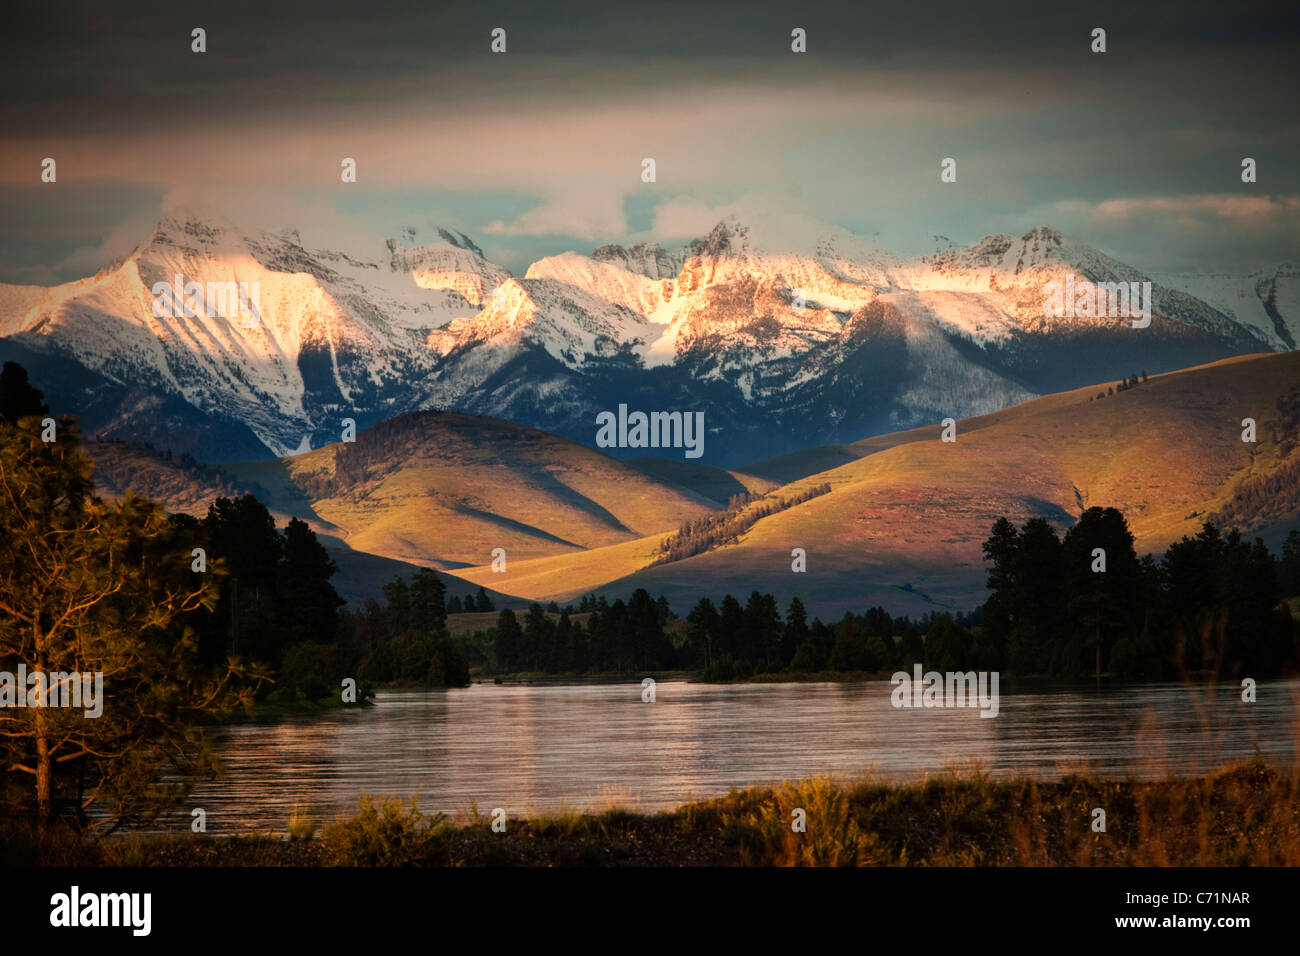 A beautiful river and mountain range at sunset in Montana. Stock Photo